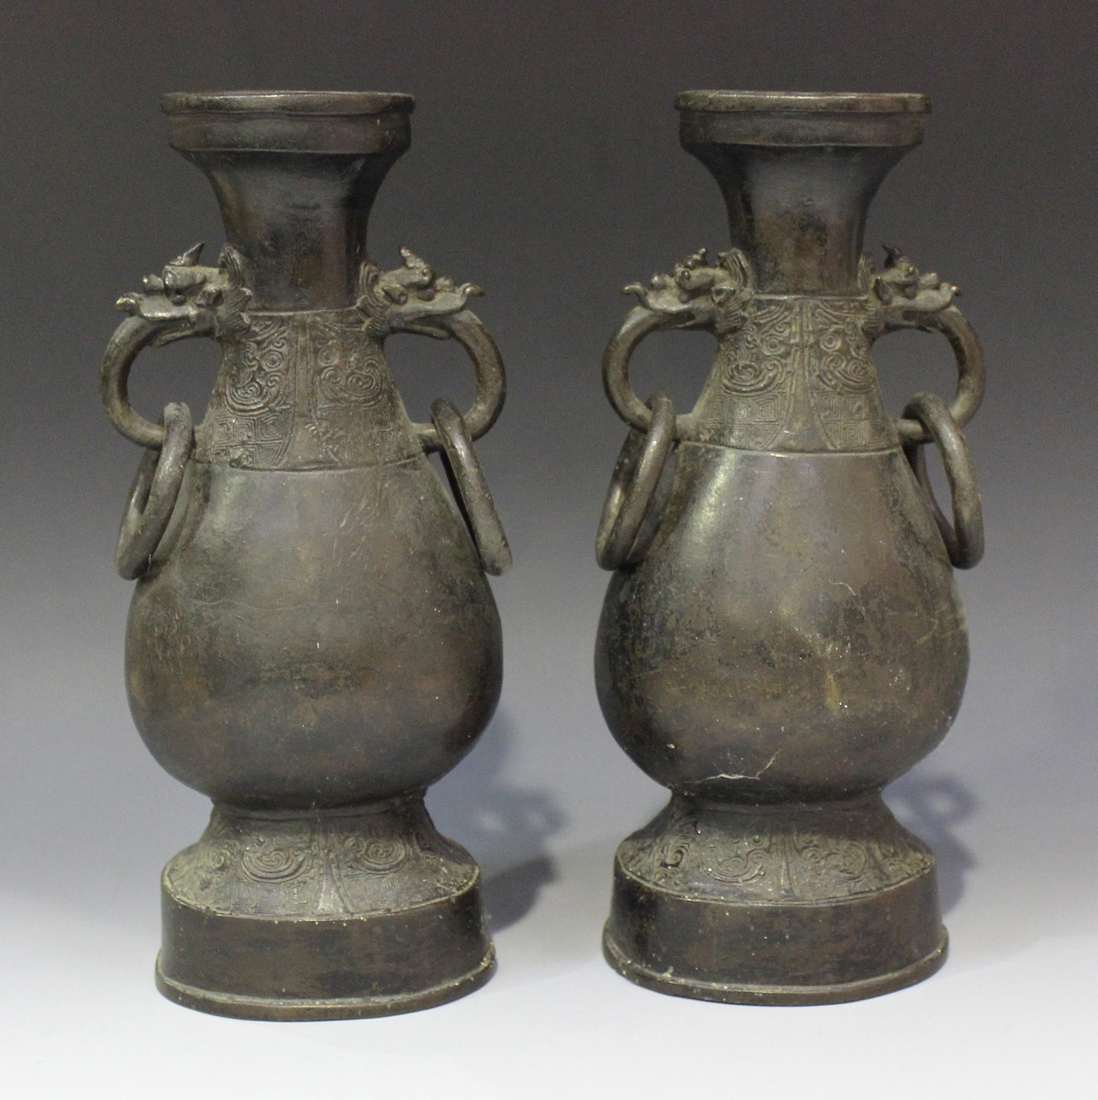 A pair of Chinese archaistic bronze hu vases, early Ming dynasty, each pear form body cast in relief